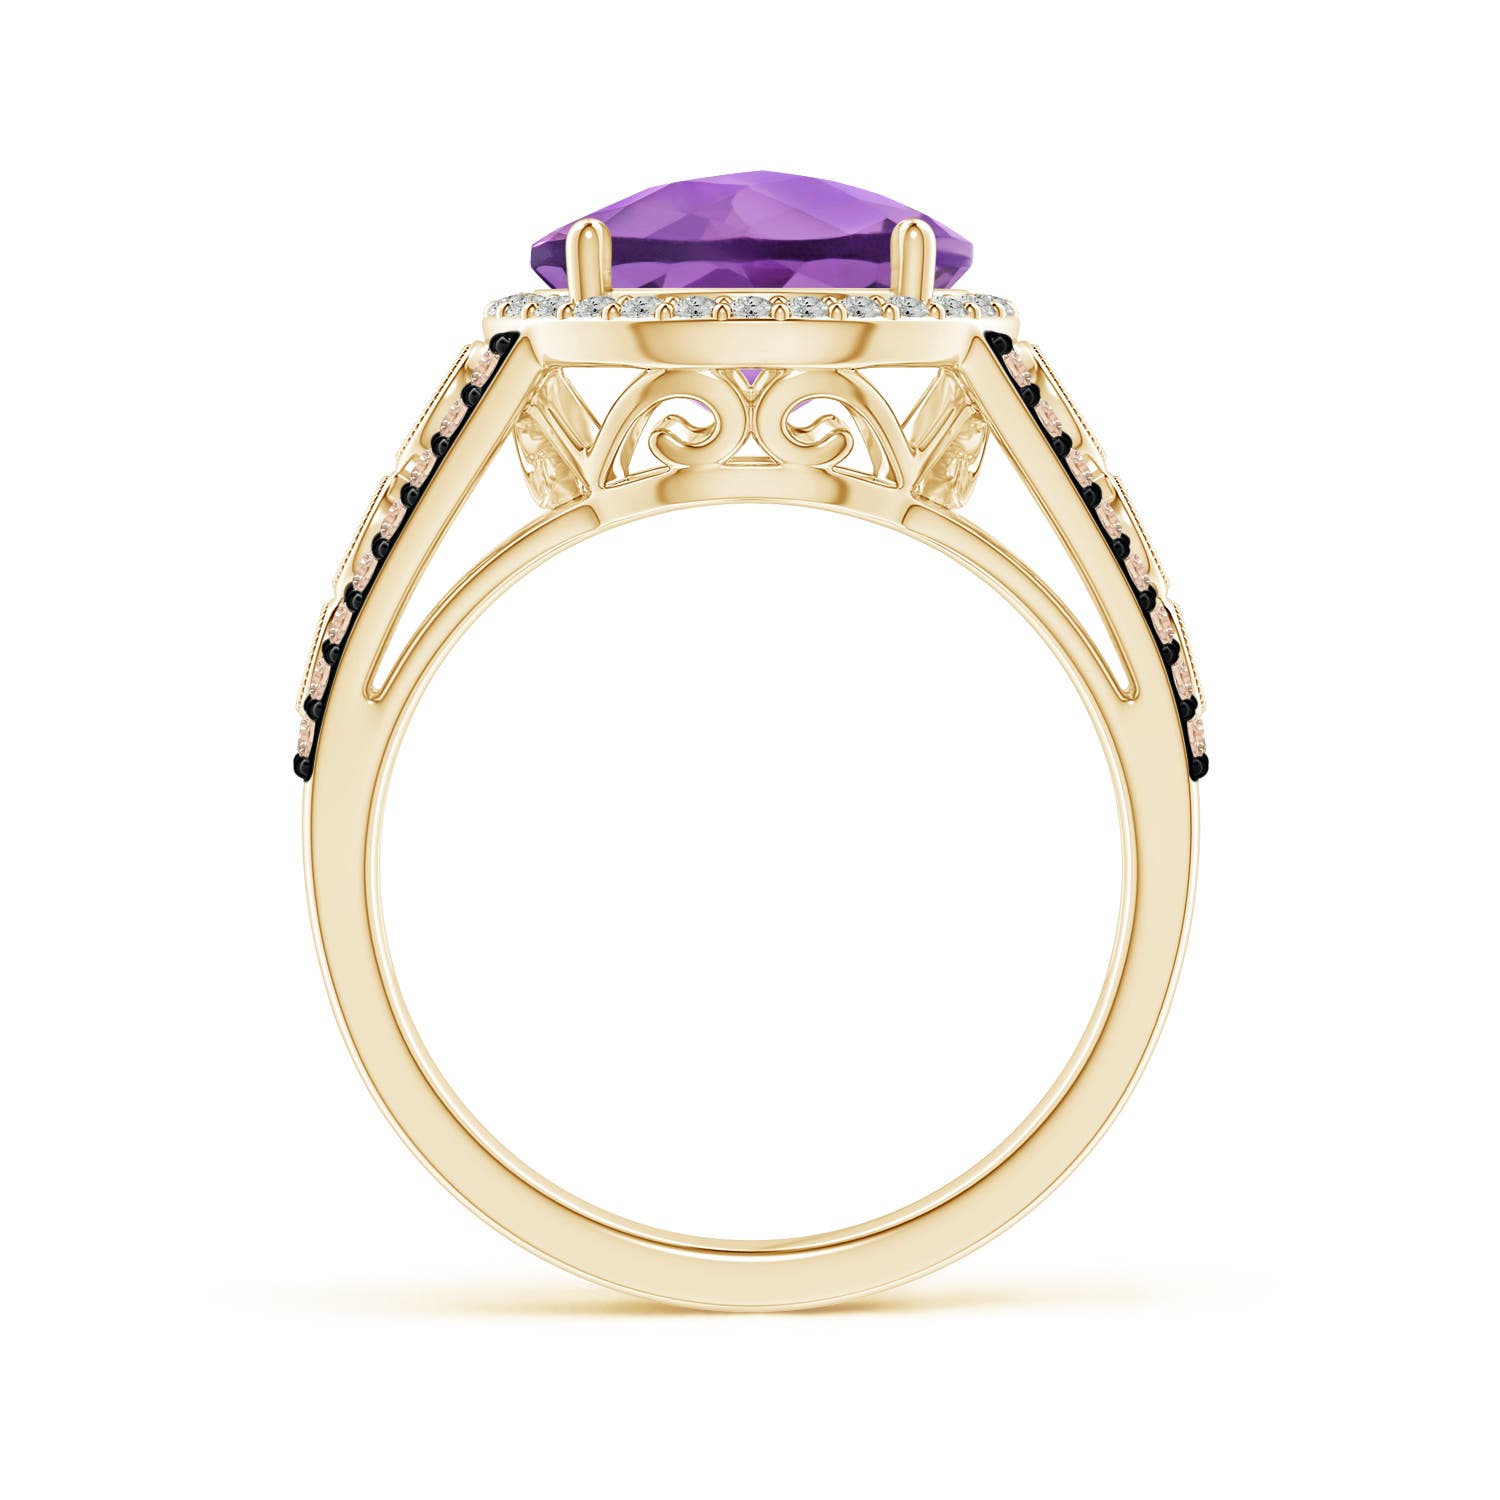 A - Amethyst / 4.42 CT / 14 KT Yellow Gold